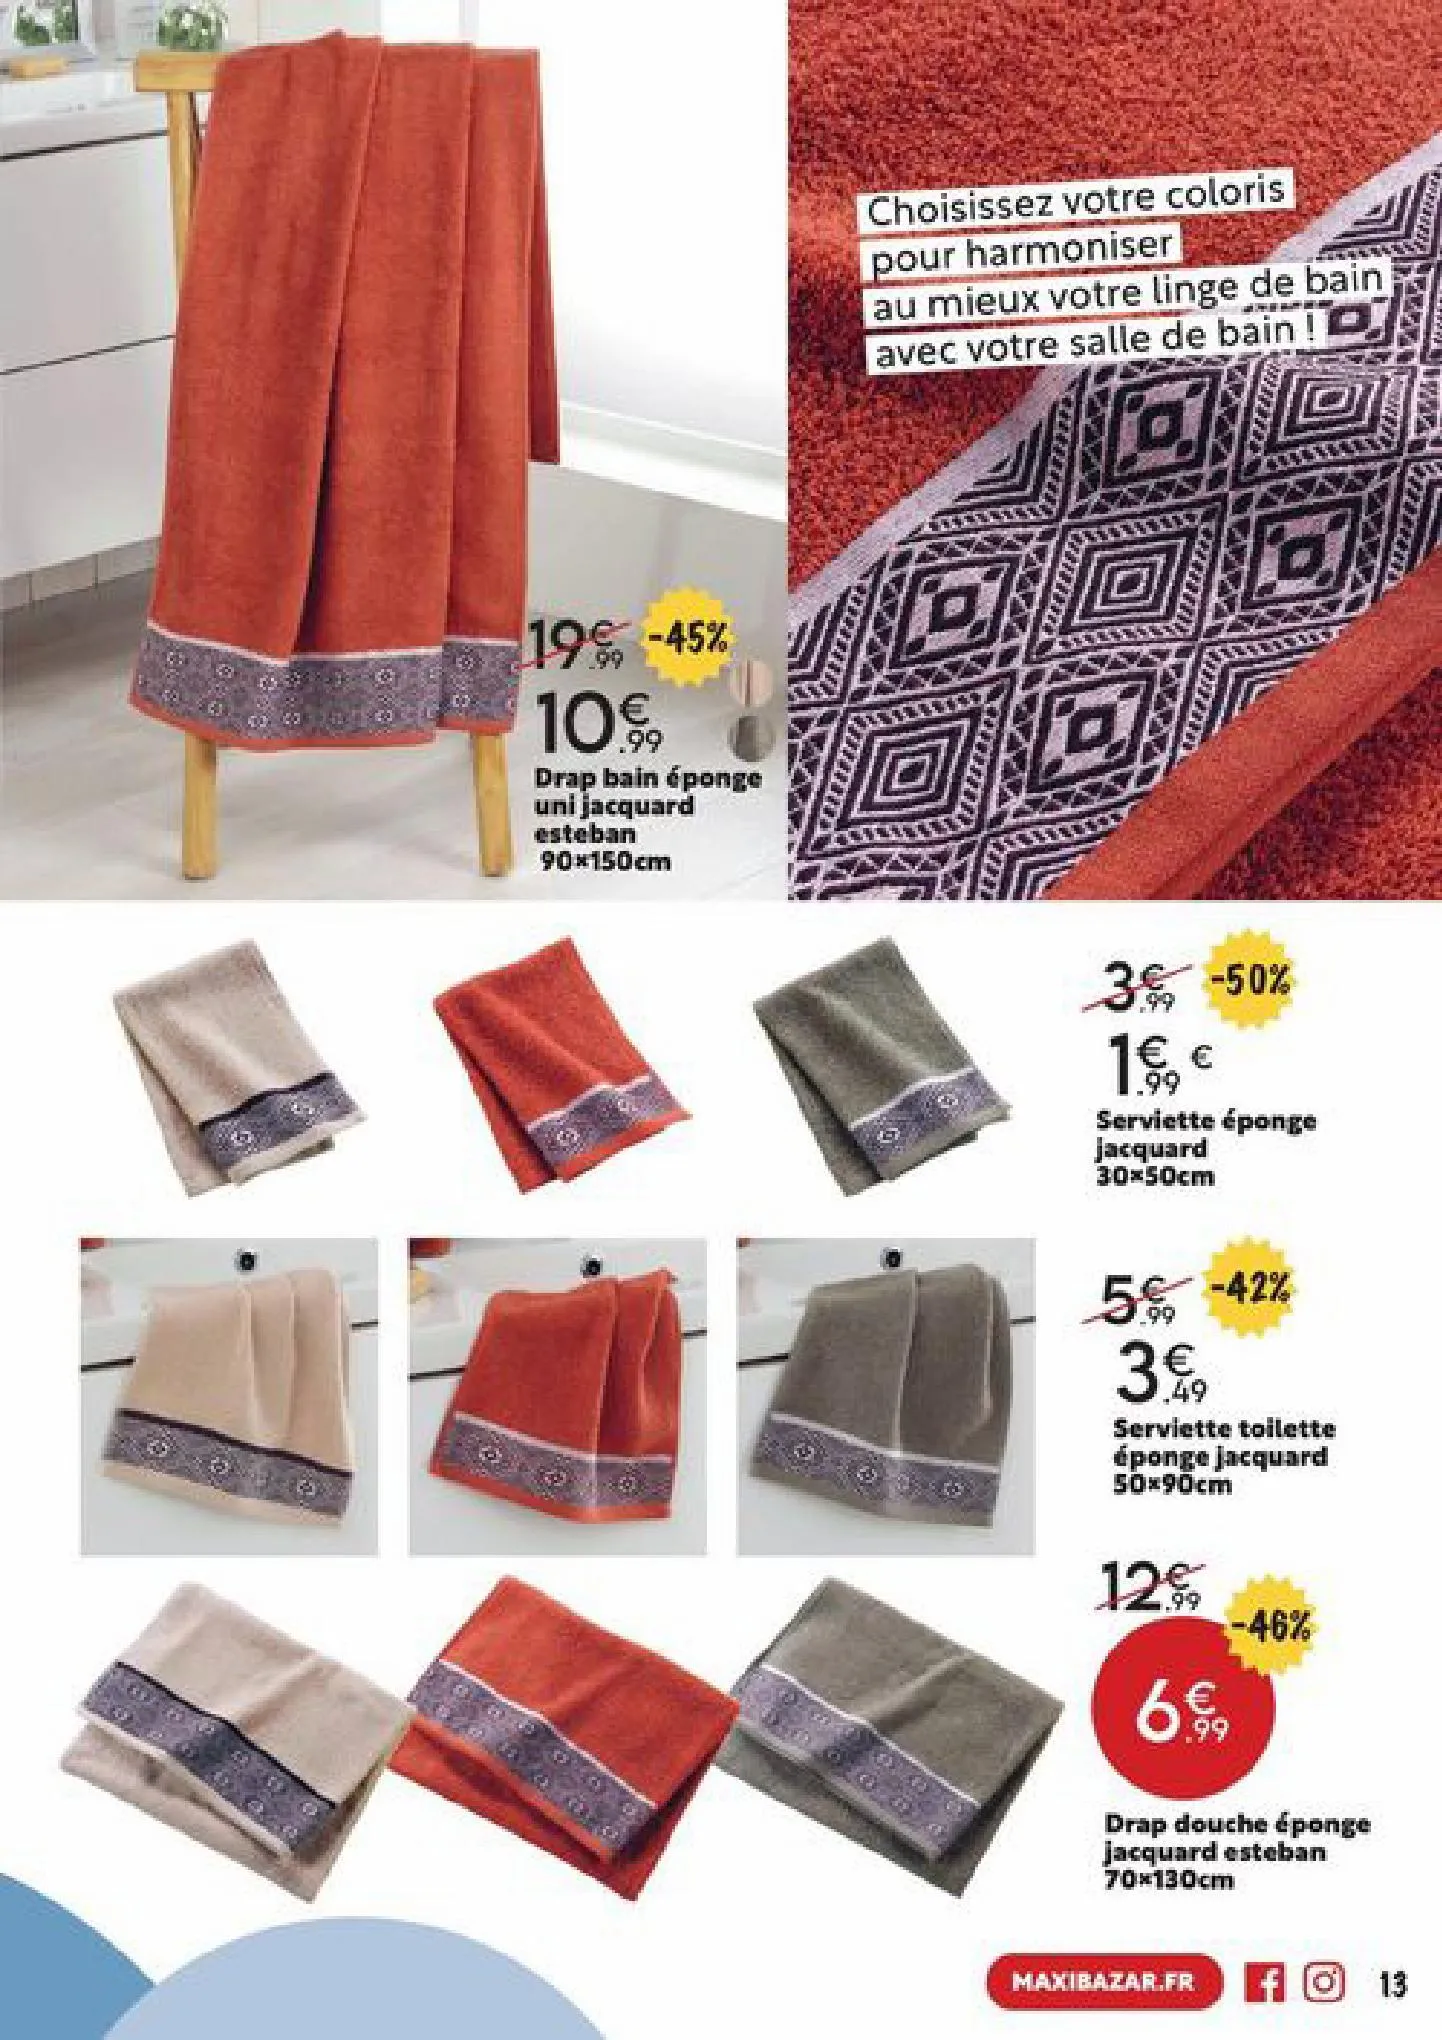 Catalogue DYA Shopping offres, page 00013